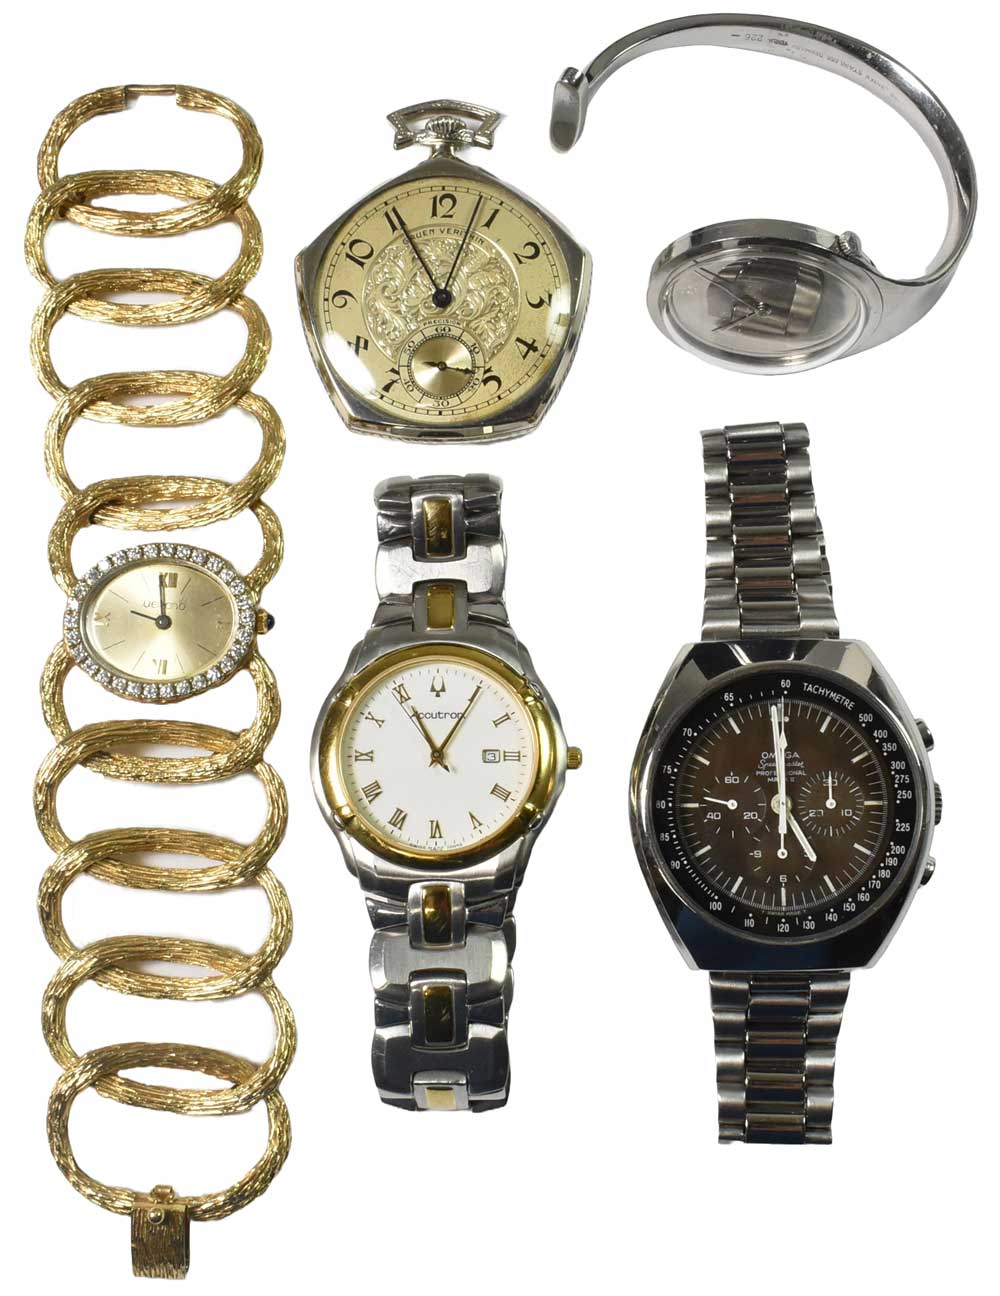 We buy gold watches, rings and bracelets.